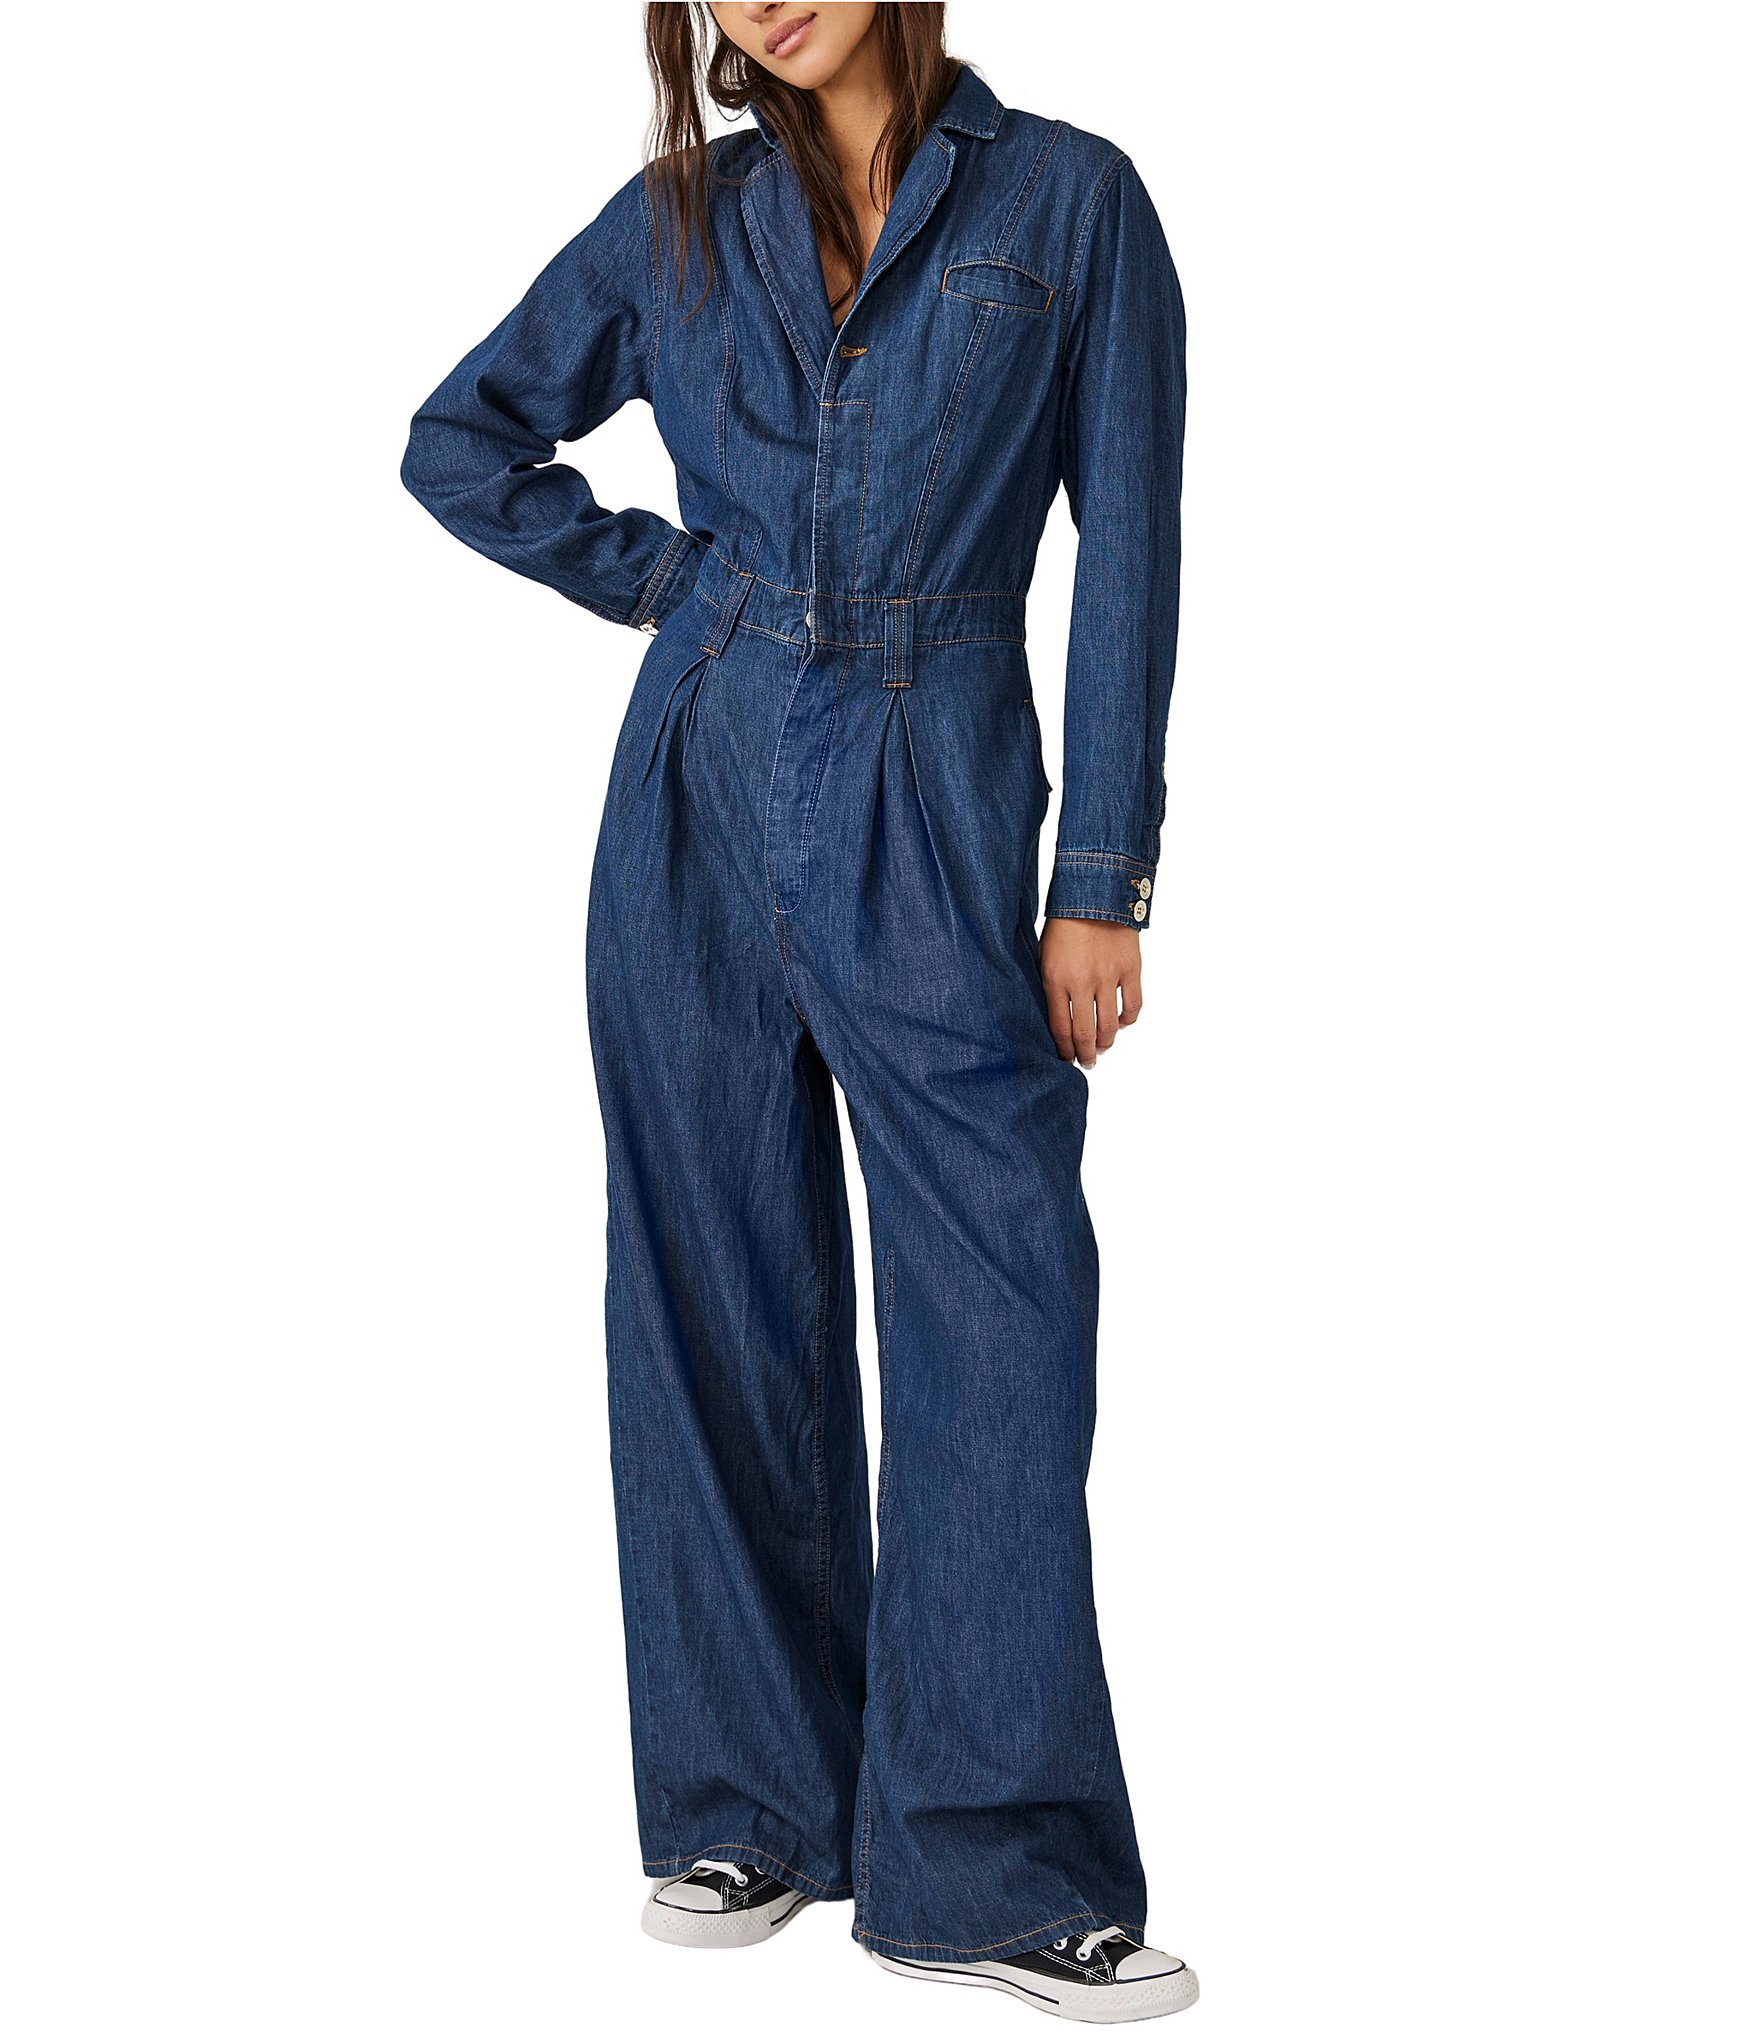 Vintage Women Loose Fit Casual One Piece Jeans Female Belt Sashes Denim  Jumpsuits at Rs 9315.99 | Women Clothes | ID: 2851546738088